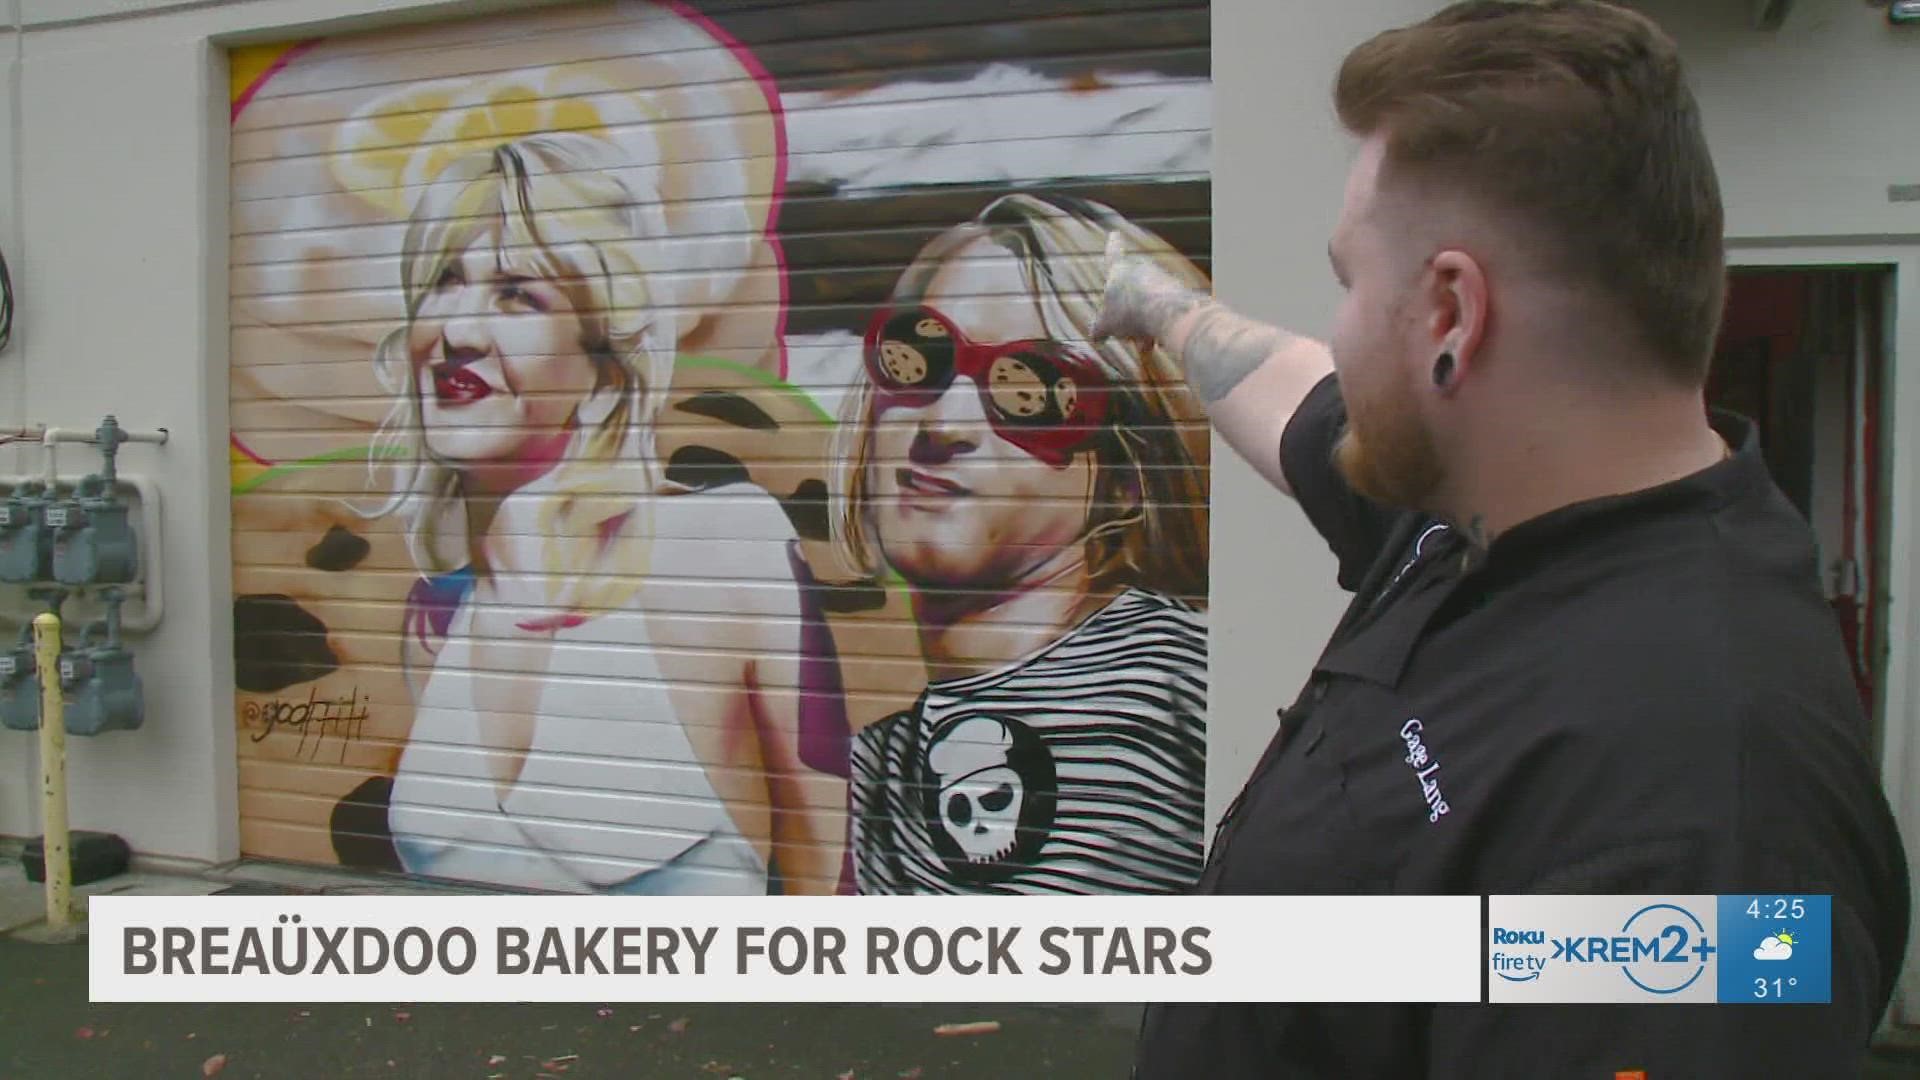 Spokane Valley bakery designed some special 'rockin' cookies for The Smashing Pumpkins, when they played at the Spokane arena on Wednesday night.